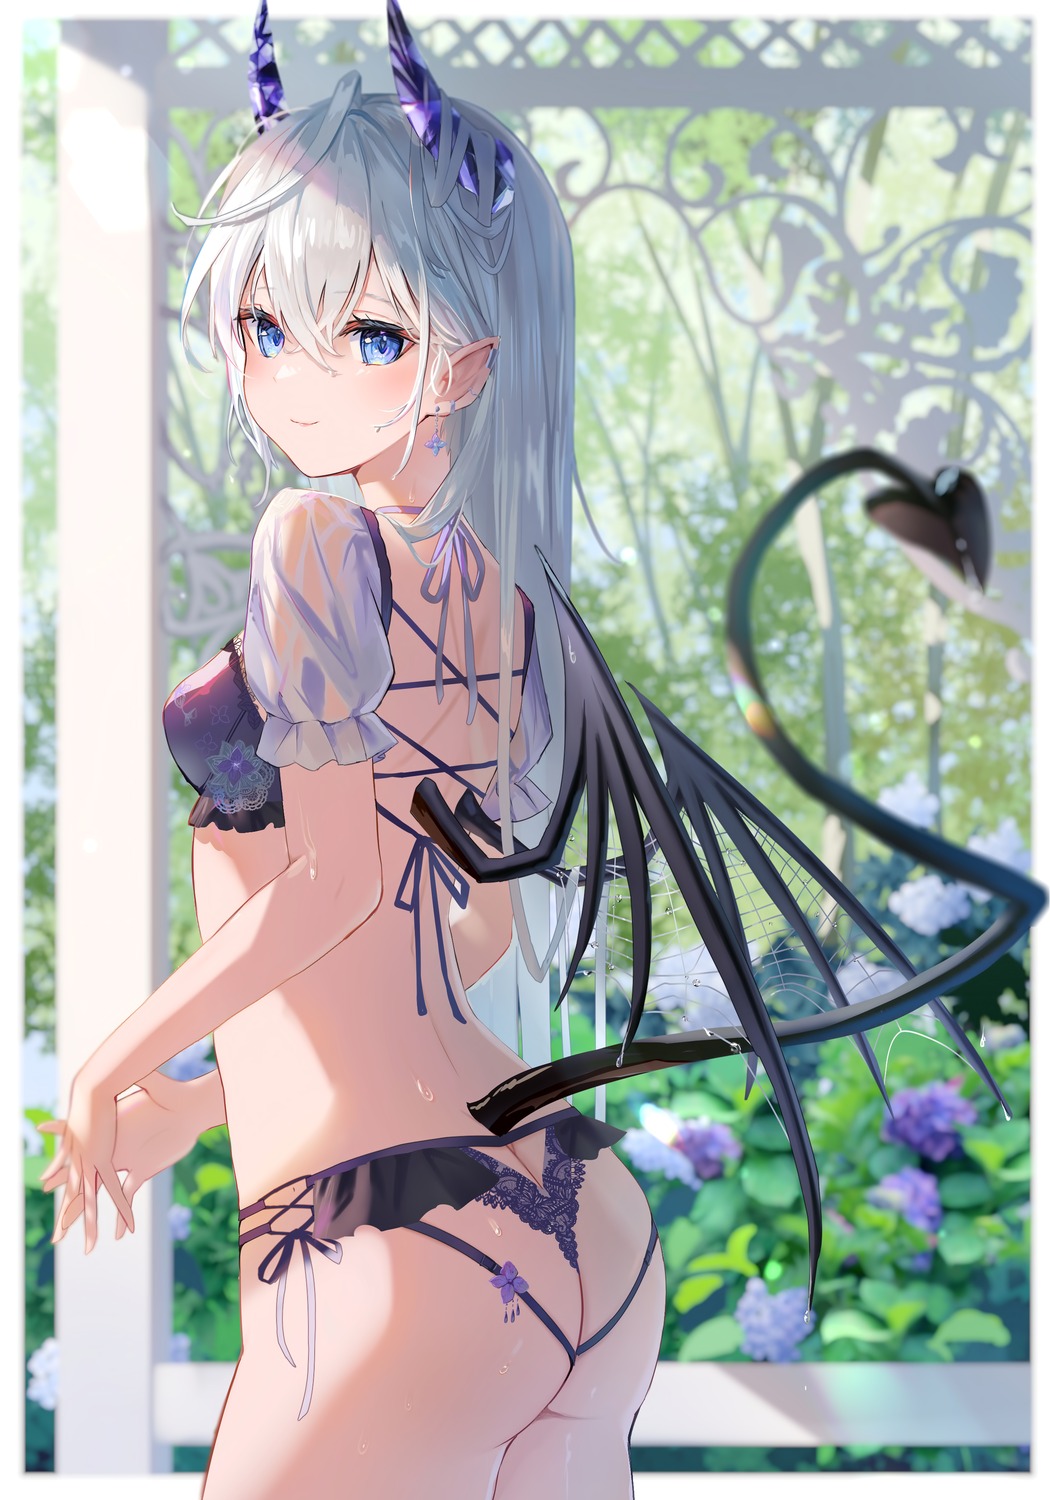 ass bra devil horns omelet_tomato omutoma pantsu pointy_ears see_through tail thong wings